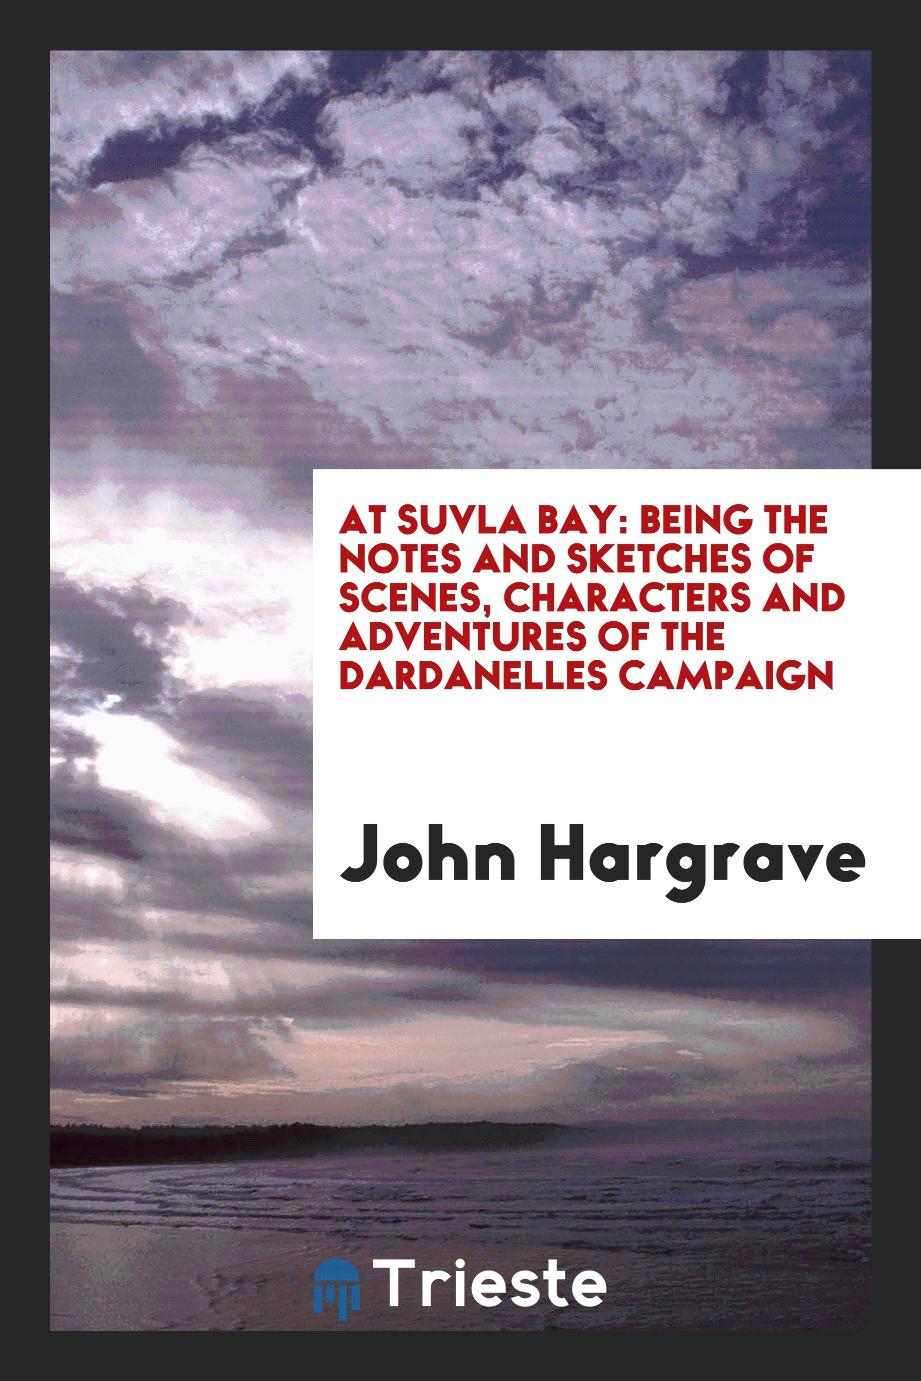 At Suvla Bay: Being the notes and sketches of scenes, characters and adventures of the dardanelles campaign